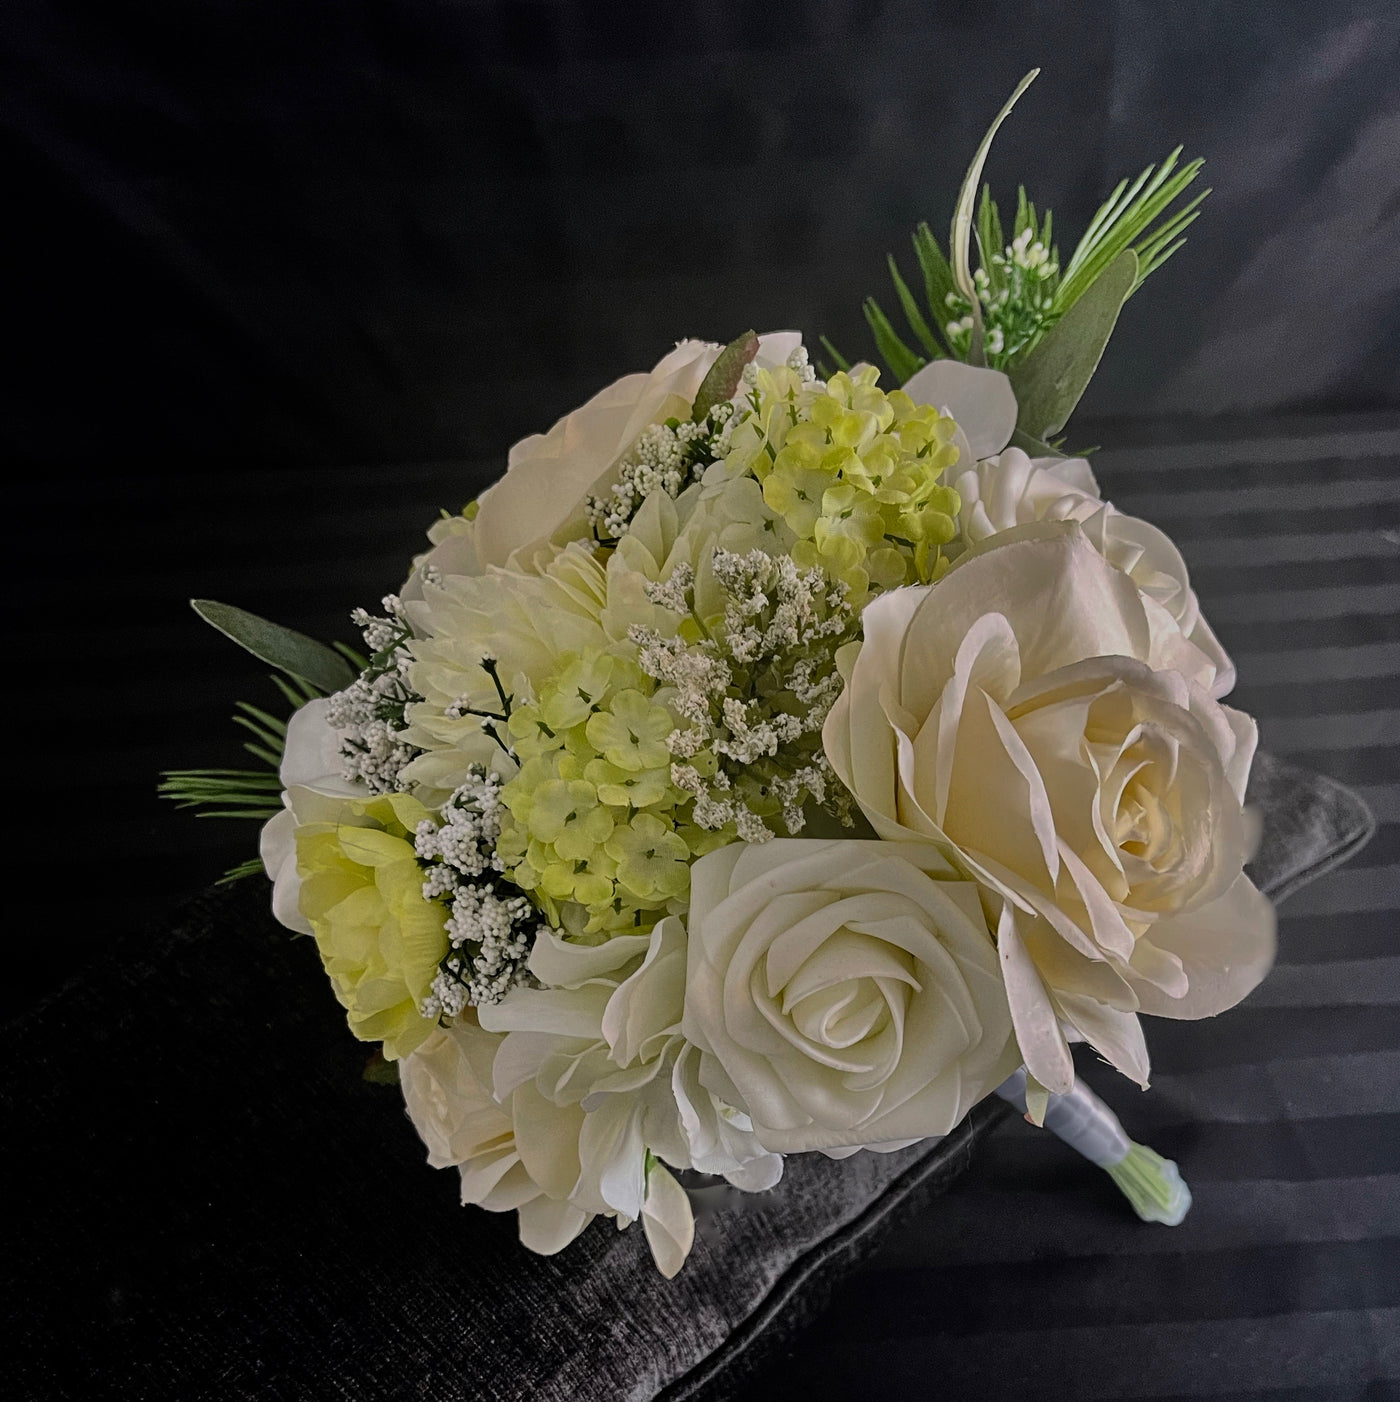 This bridesmaid bouquet combines white roses, hydrangea and dahlias with pale green cabbage roses to create this classic bouquet. Additional visual interest is provided by green and cream berries, ferns and seeded eucalyptus. Rent for five days for $19.00